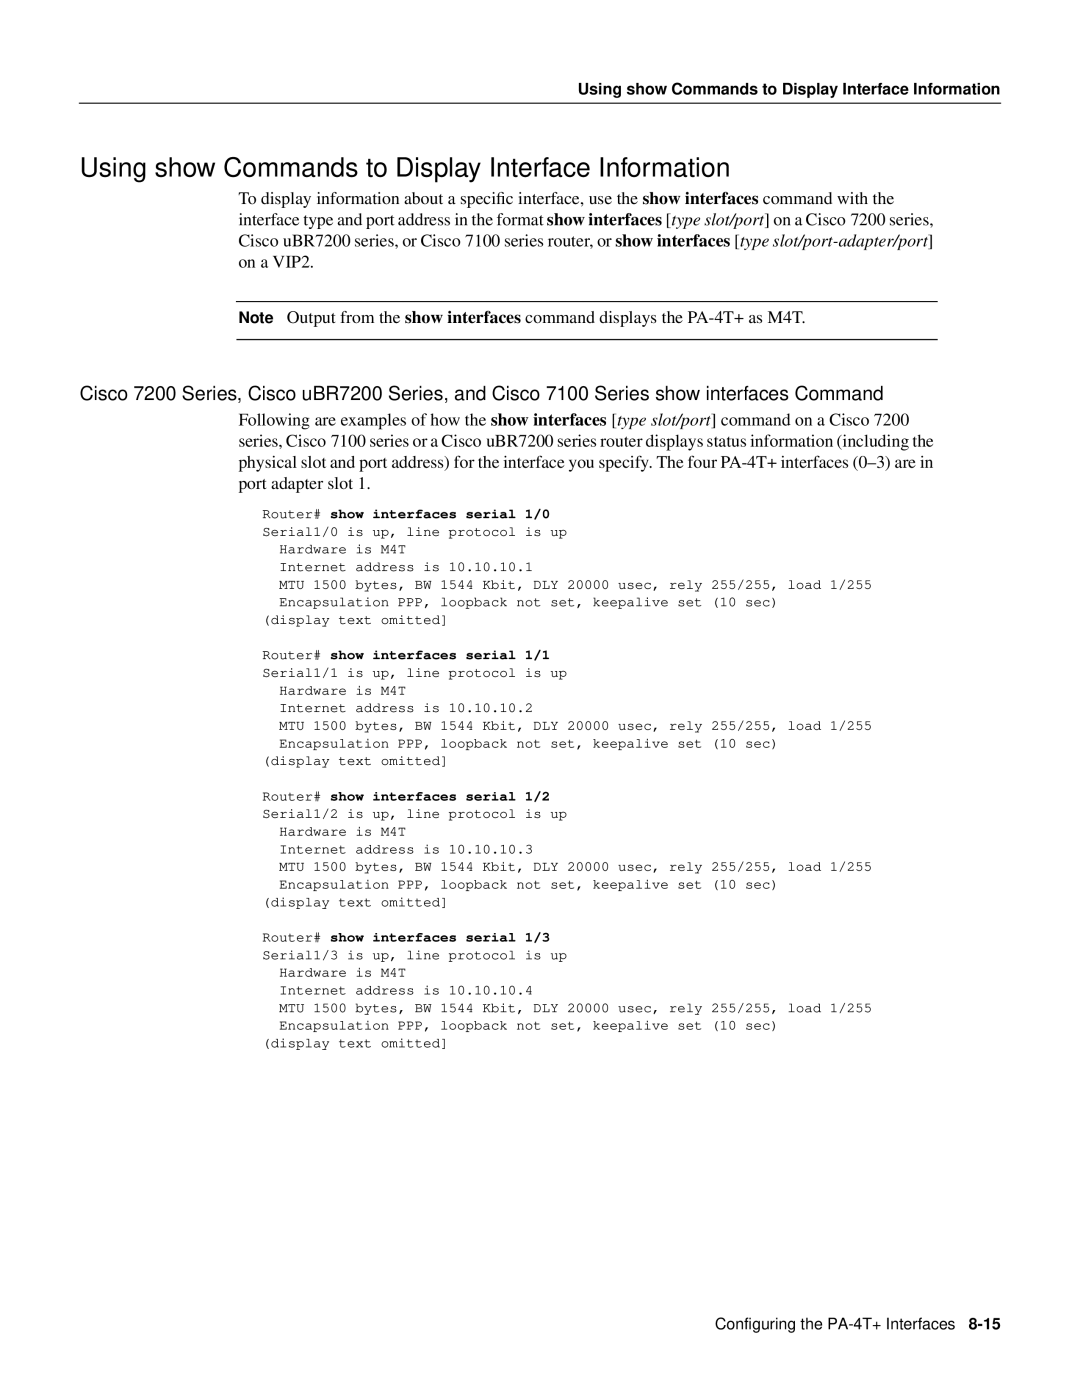 Cisco Systems PA-4T manual Using show Commands to Display Interface Information 